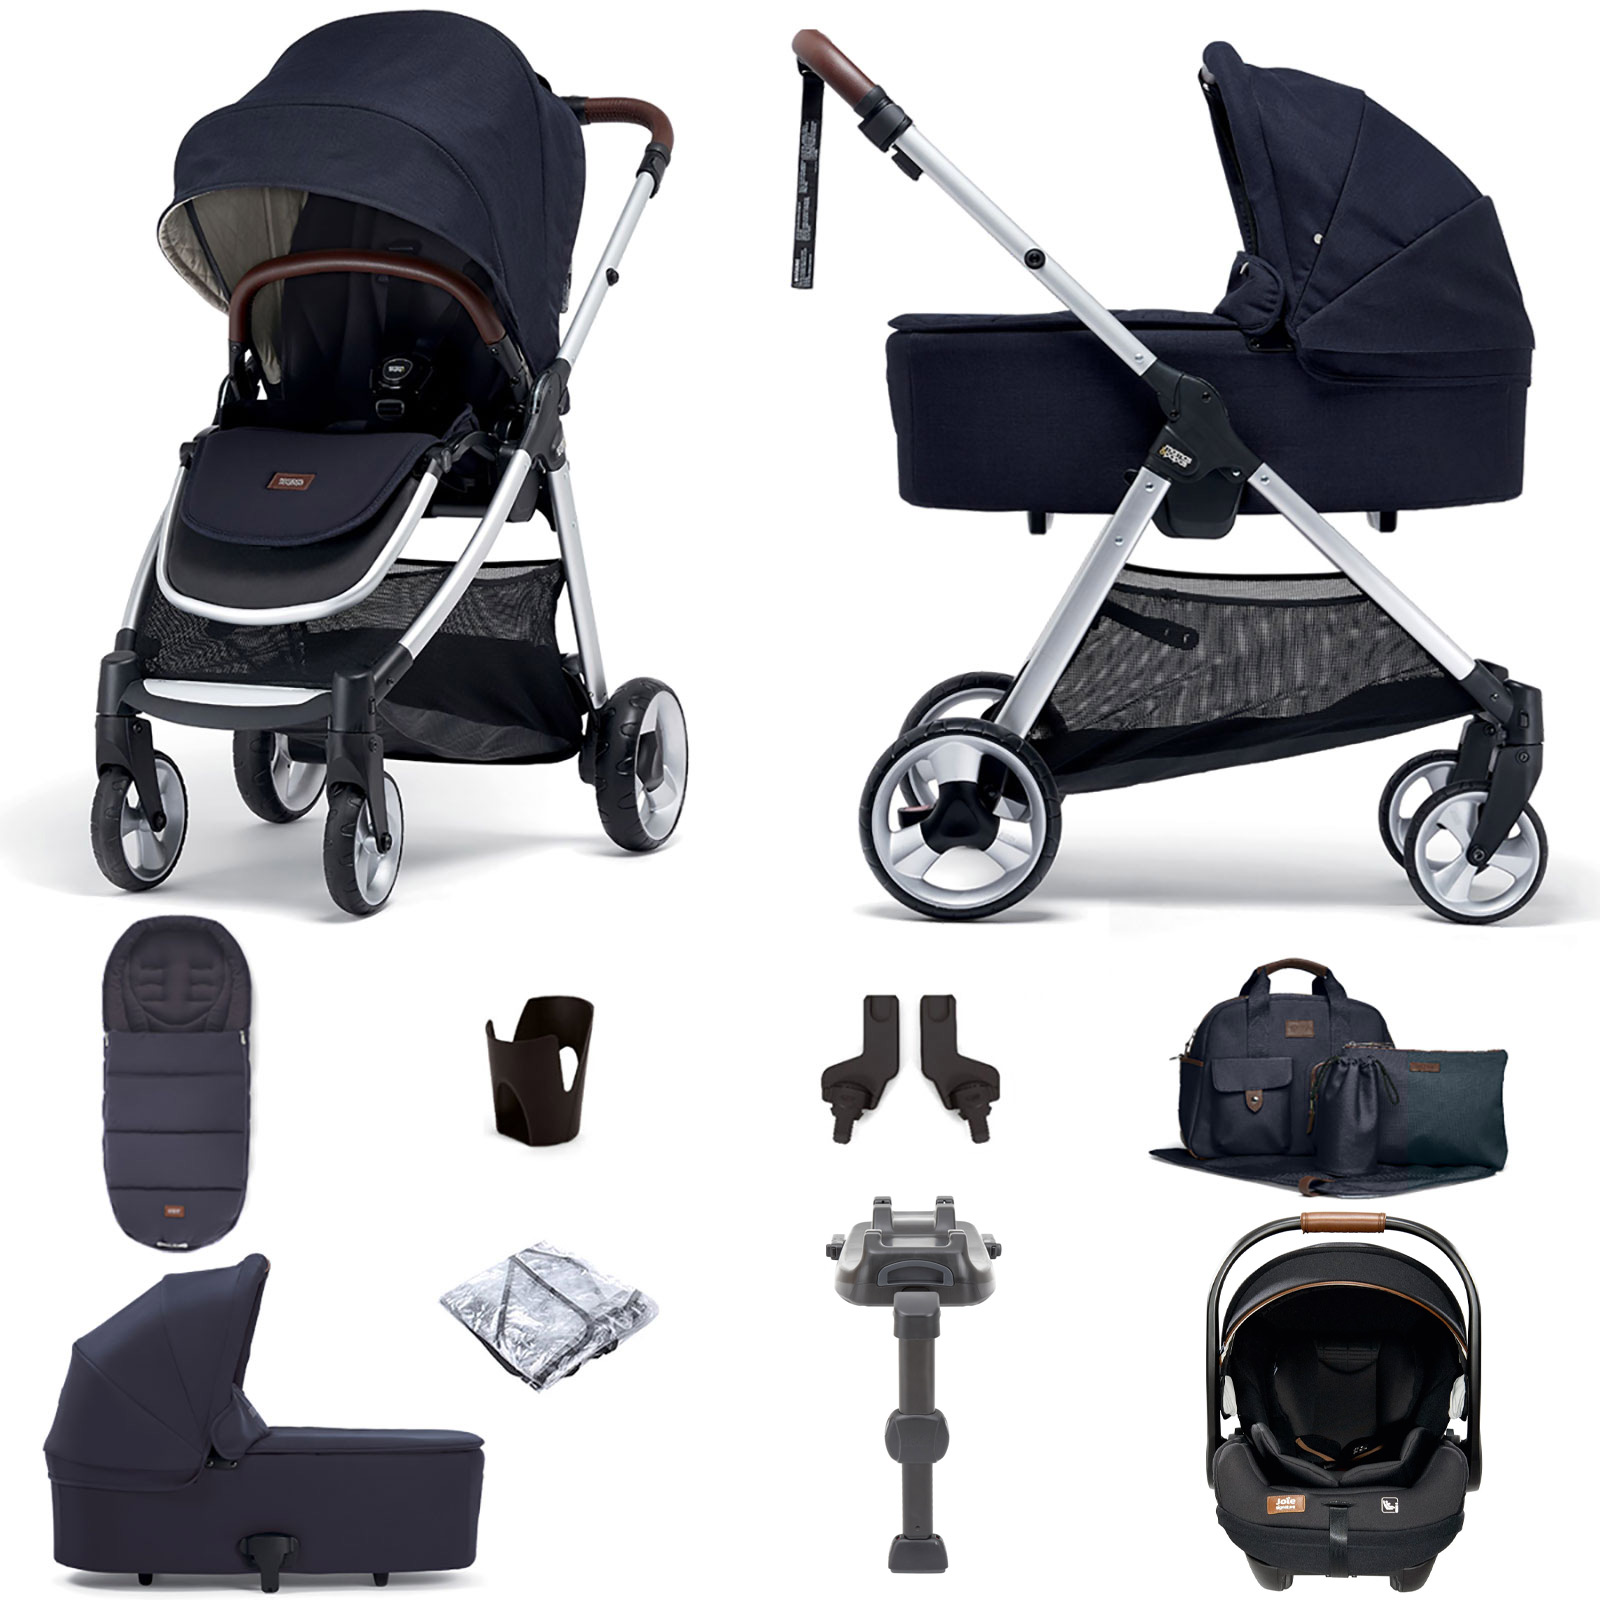 Mamas & Papas Flip XT2 Travel System with Carrycot, Accessories, i-Level Recline Car Seat & i-Base LX 2 - Navy